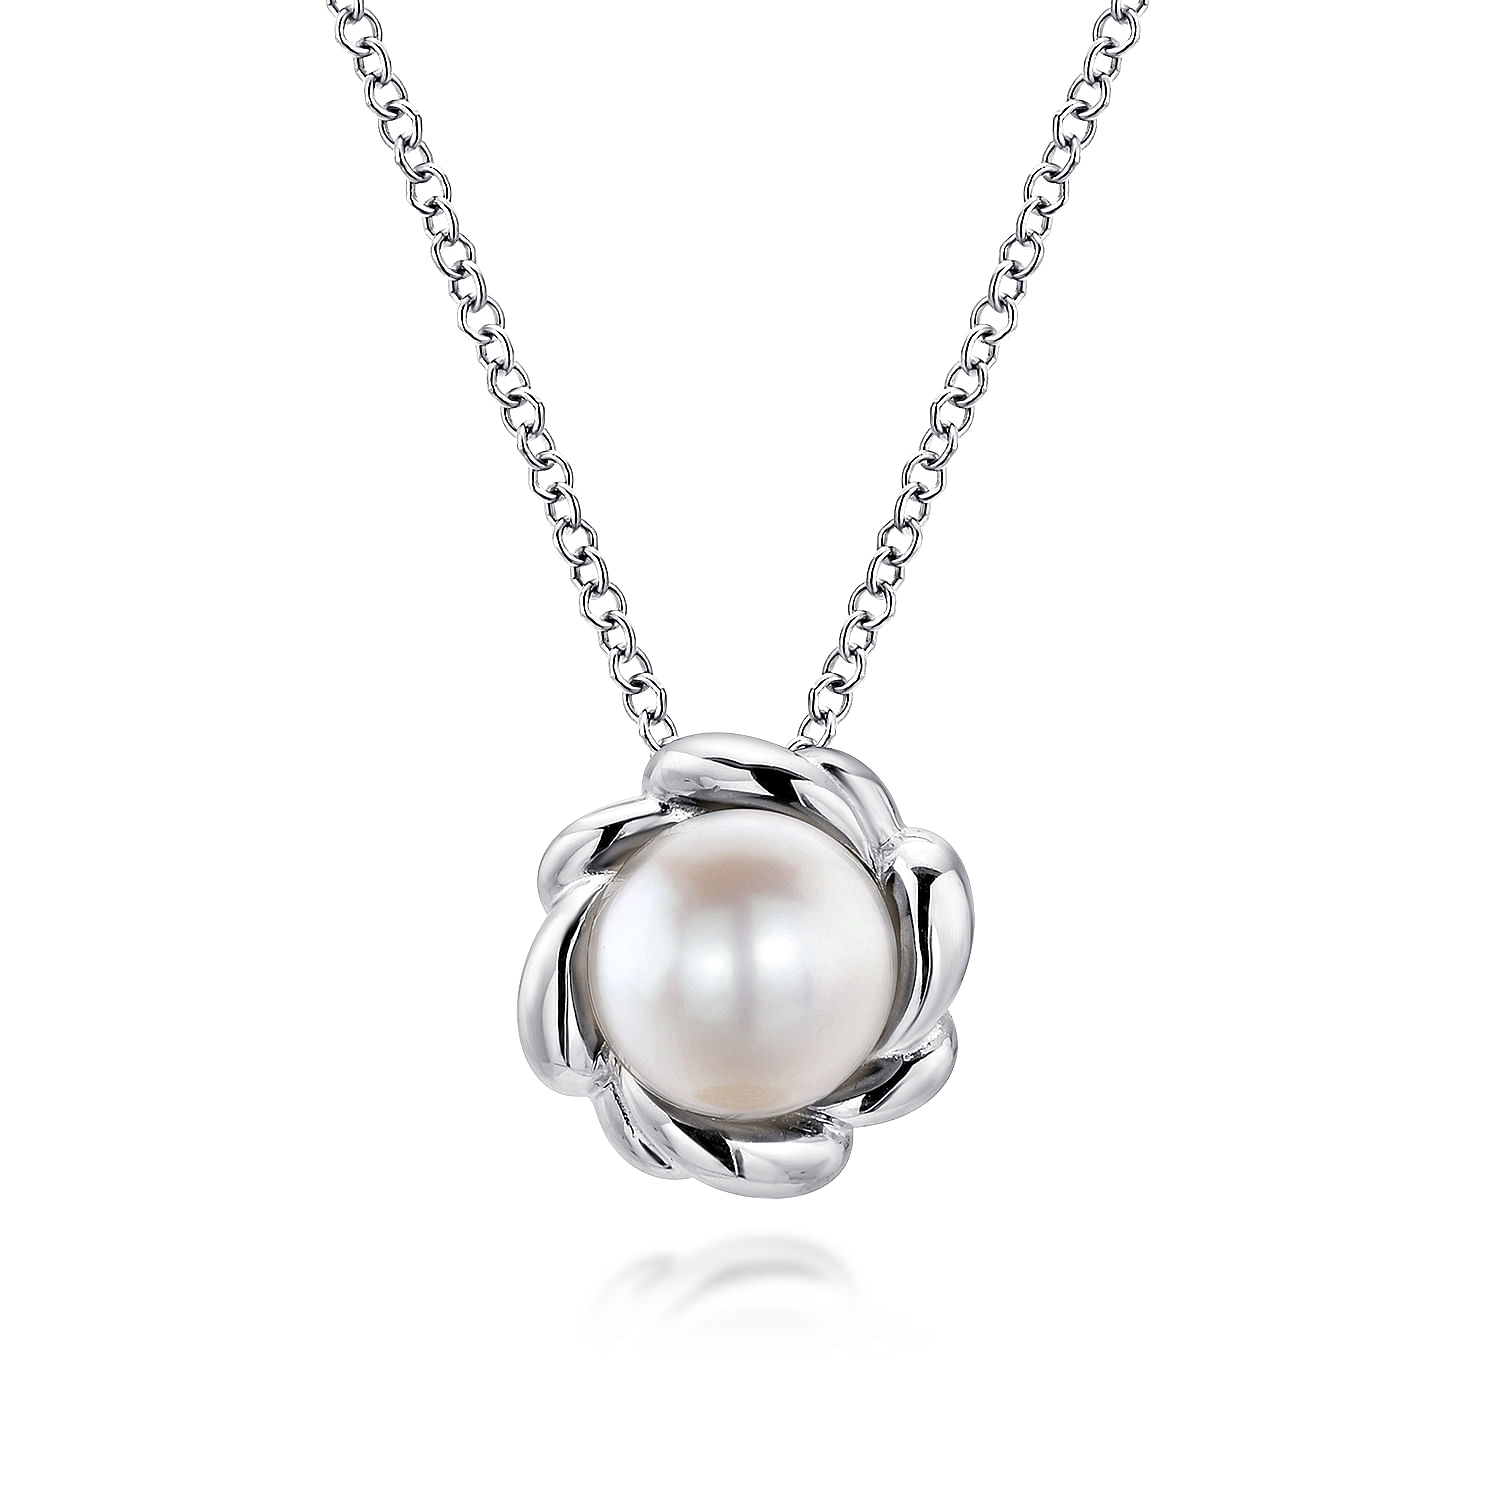 925-Sterling-Silver-Swirling-Cultured-Pearl-Pendant-Necklace1